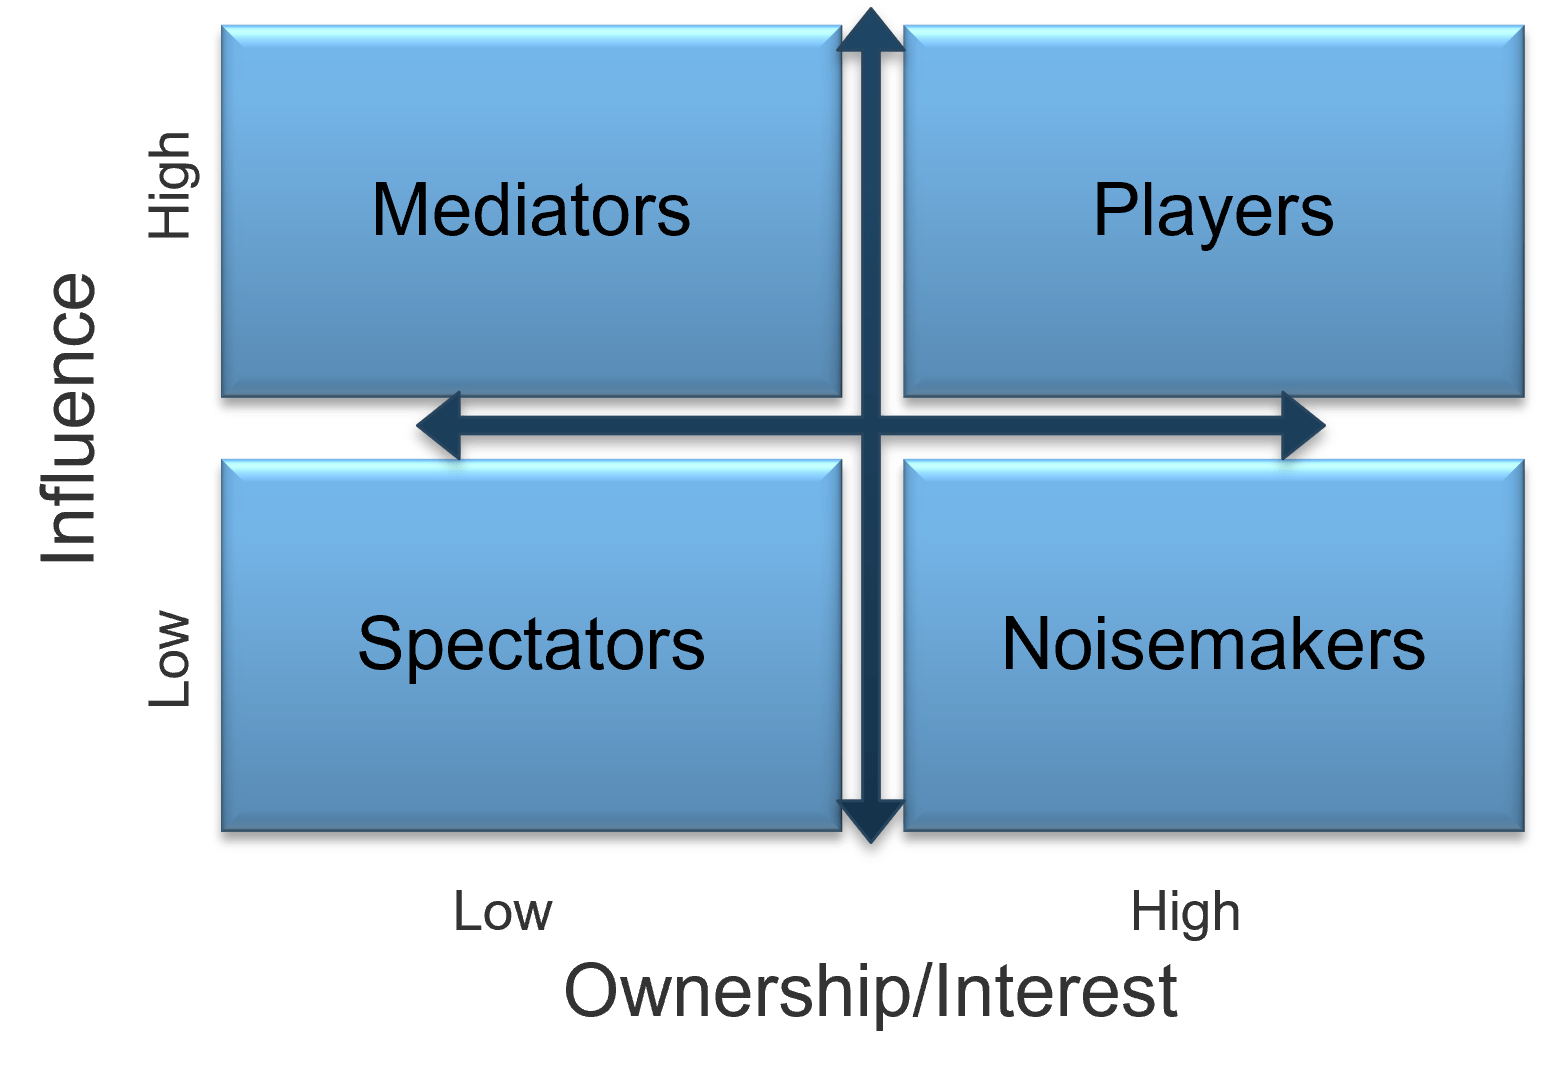 Stakeholder prioritization map with axes 'Influence' and 'Ownership/Interest' splitting the map into four quadrants: 'Spectators Low/Low', 'Noisemakers Low/High', 'Mediators High/Low', and 'Players High/High'.